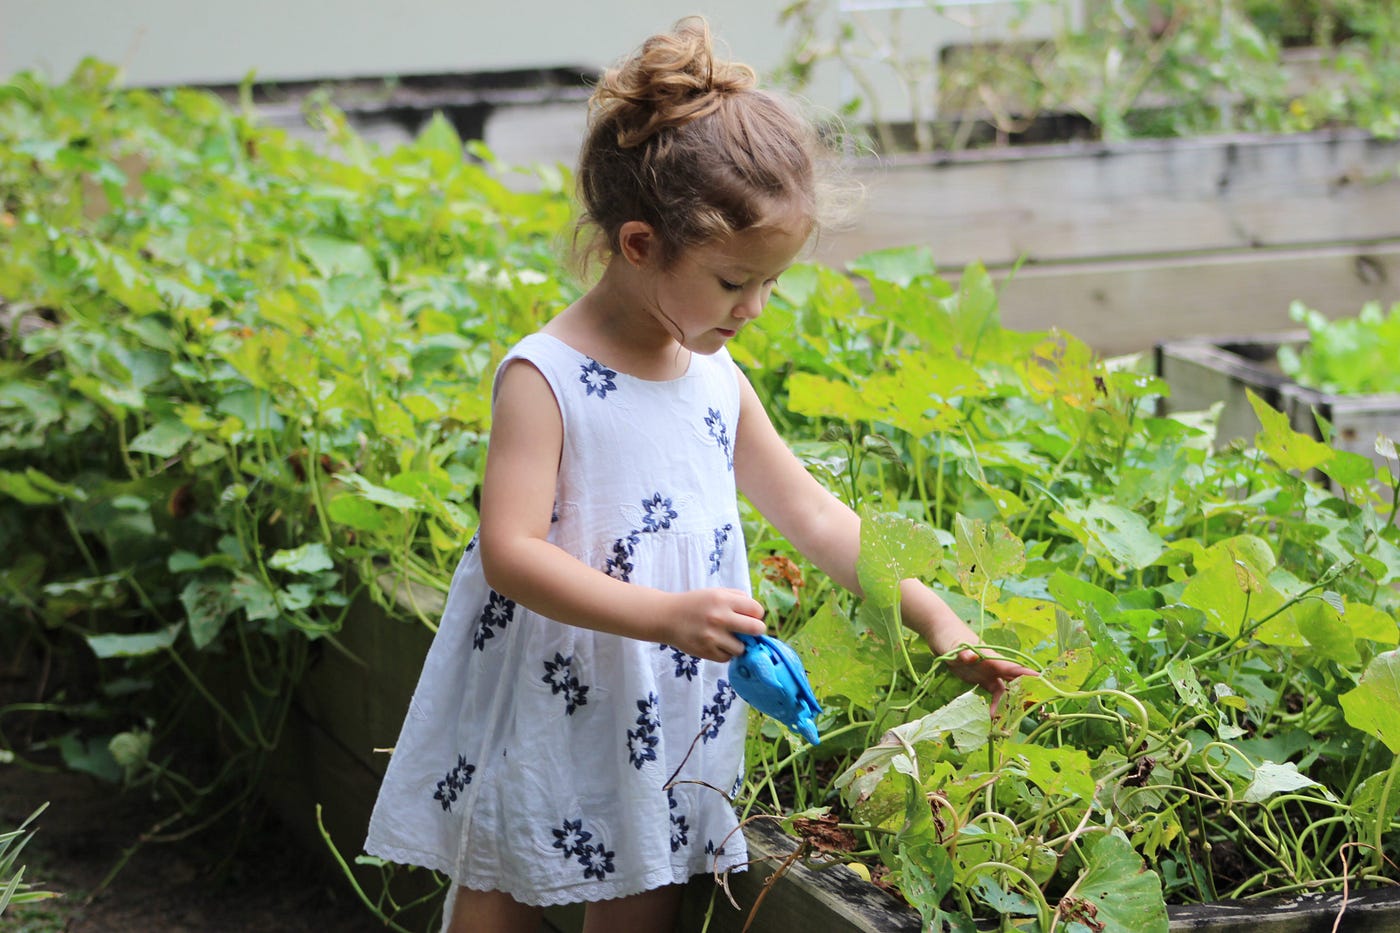 A young child in a white sleeveless dress with blue floral patterns is watering plants in a garden with a blue watering can. The child is focused on the task, and the garden is lush with green foliage.